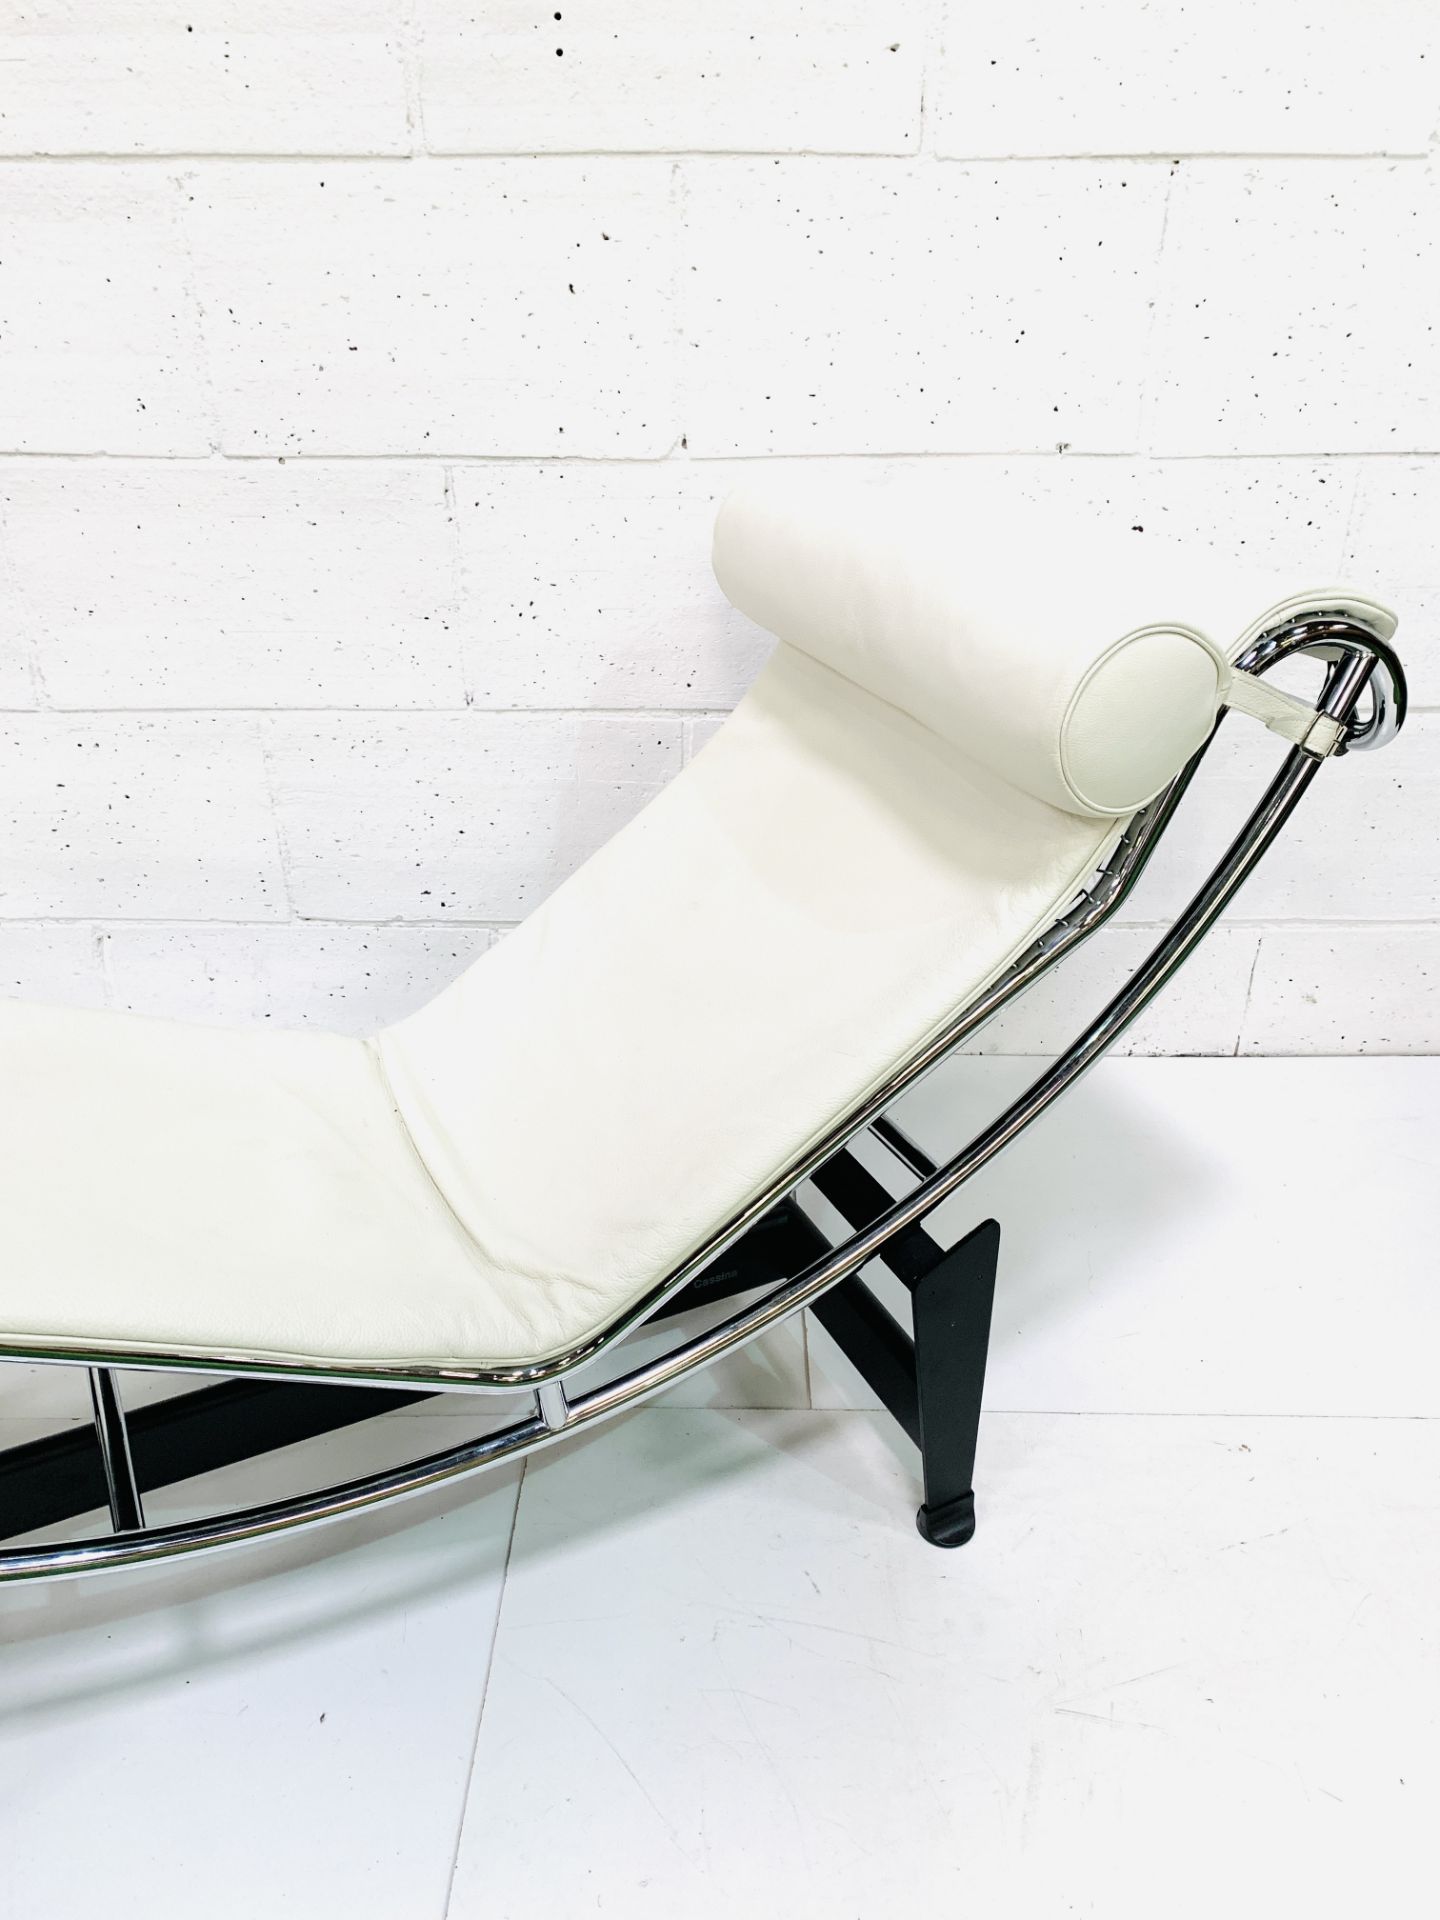 Cassina cream leather and chrome framed chaise longue - Image 5 of 5